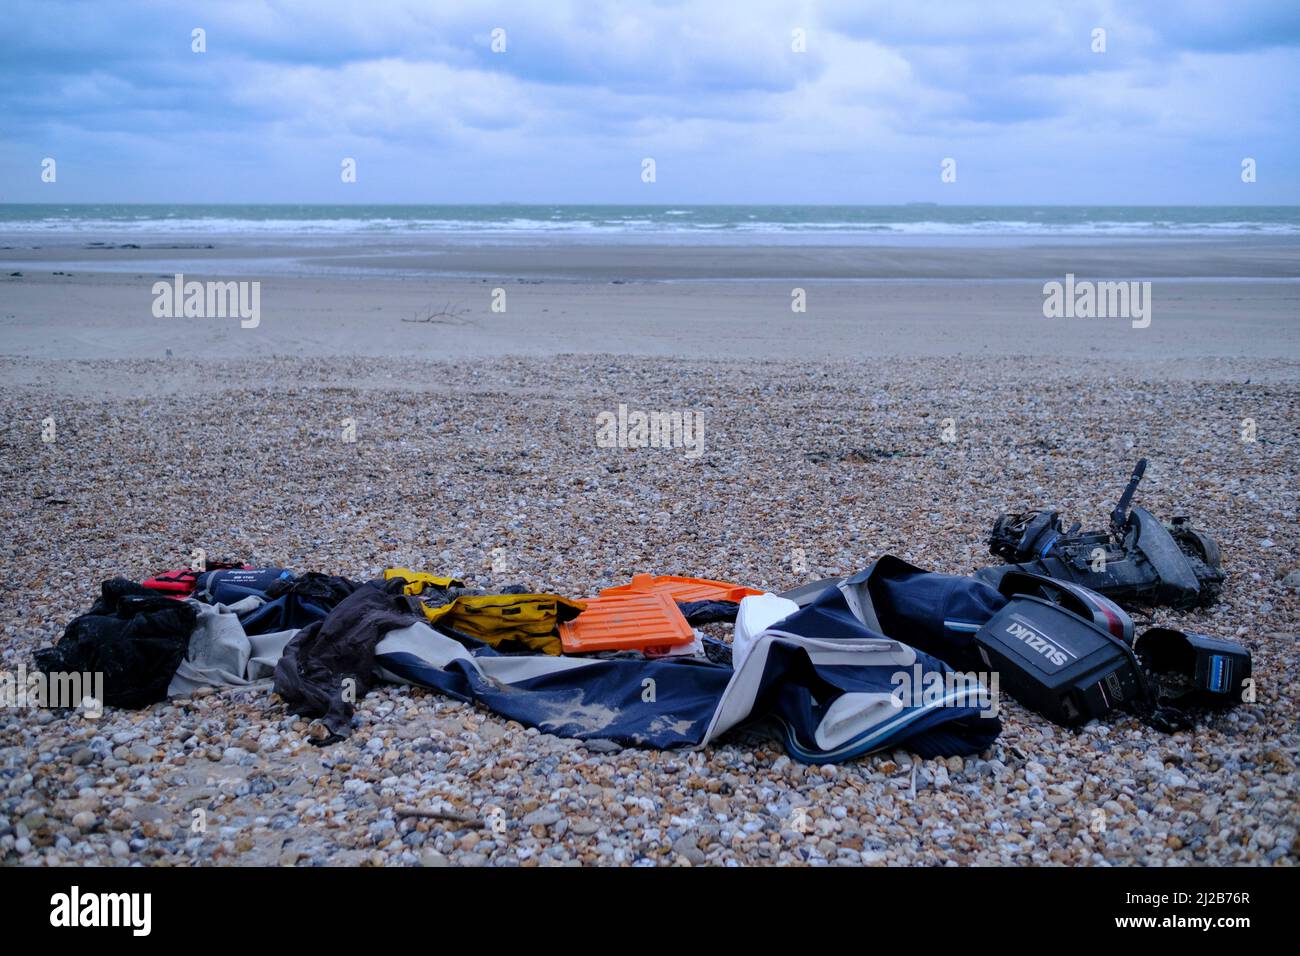 Refugees and migrants in the Hauts-de-France region (northern France), on November 26, 2021: pieces of boat, engine and refugees’ personal belongings Stock Photo